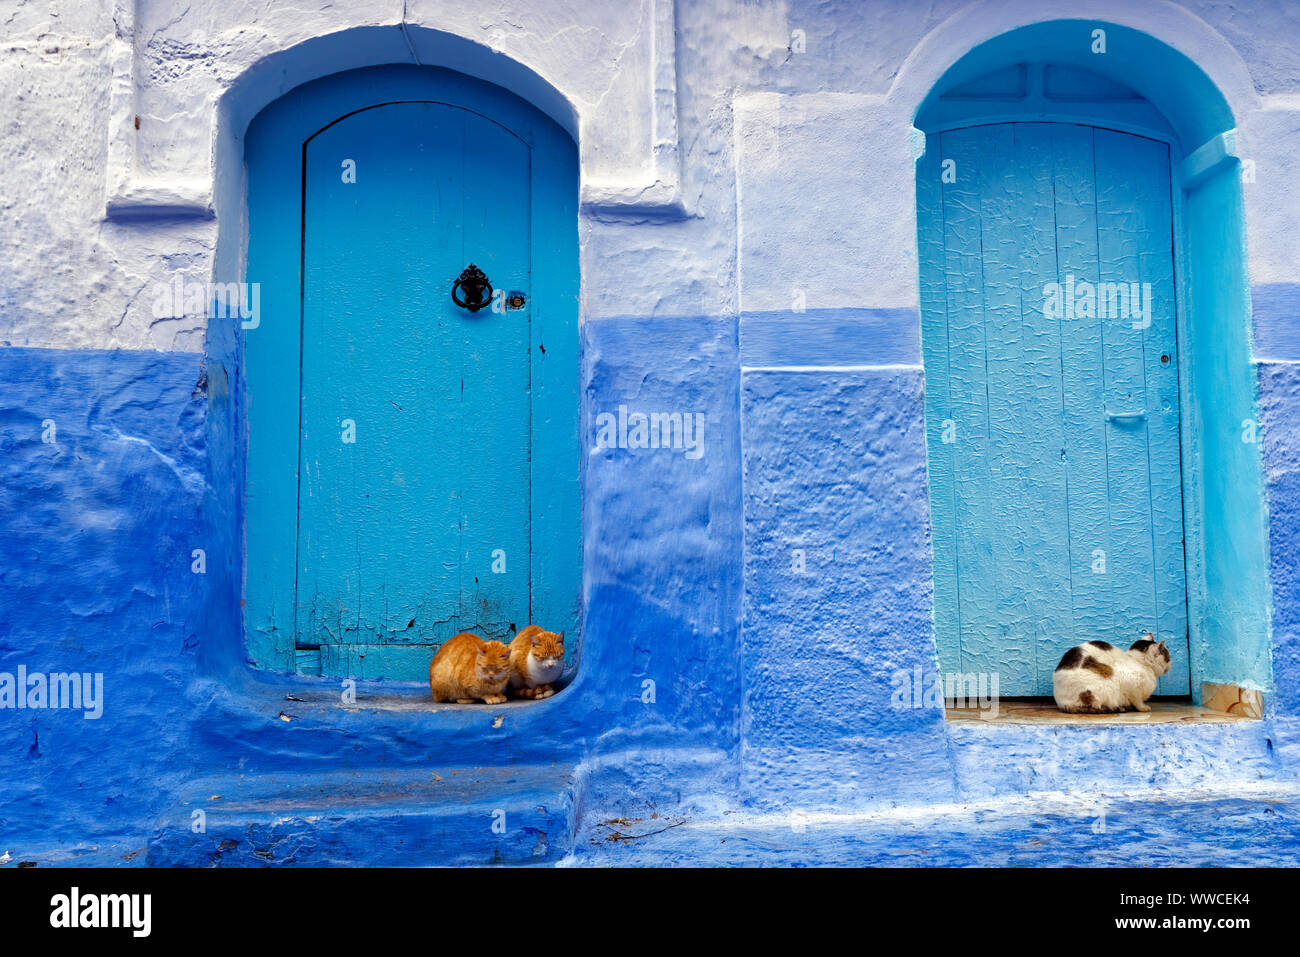 A view of the distinctive blue architecture of Chefchaouen in northwest Morocco. Stock Photo